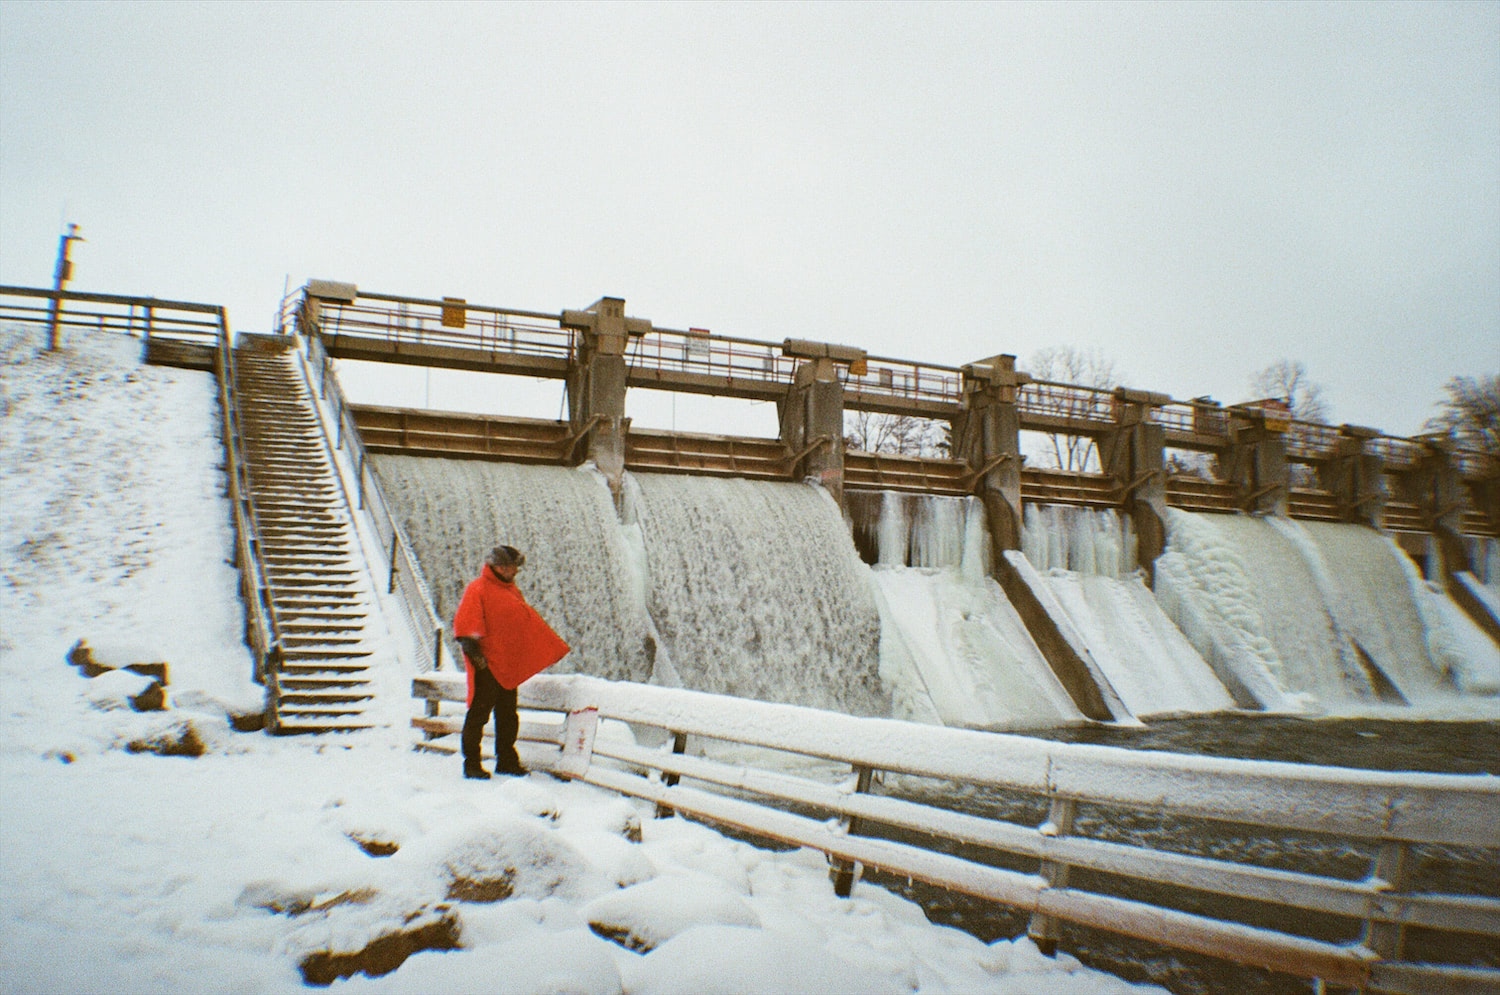 The half-frozen Barton Dam roars behind a man in an orange poncho, blowing from the strong winter wind.